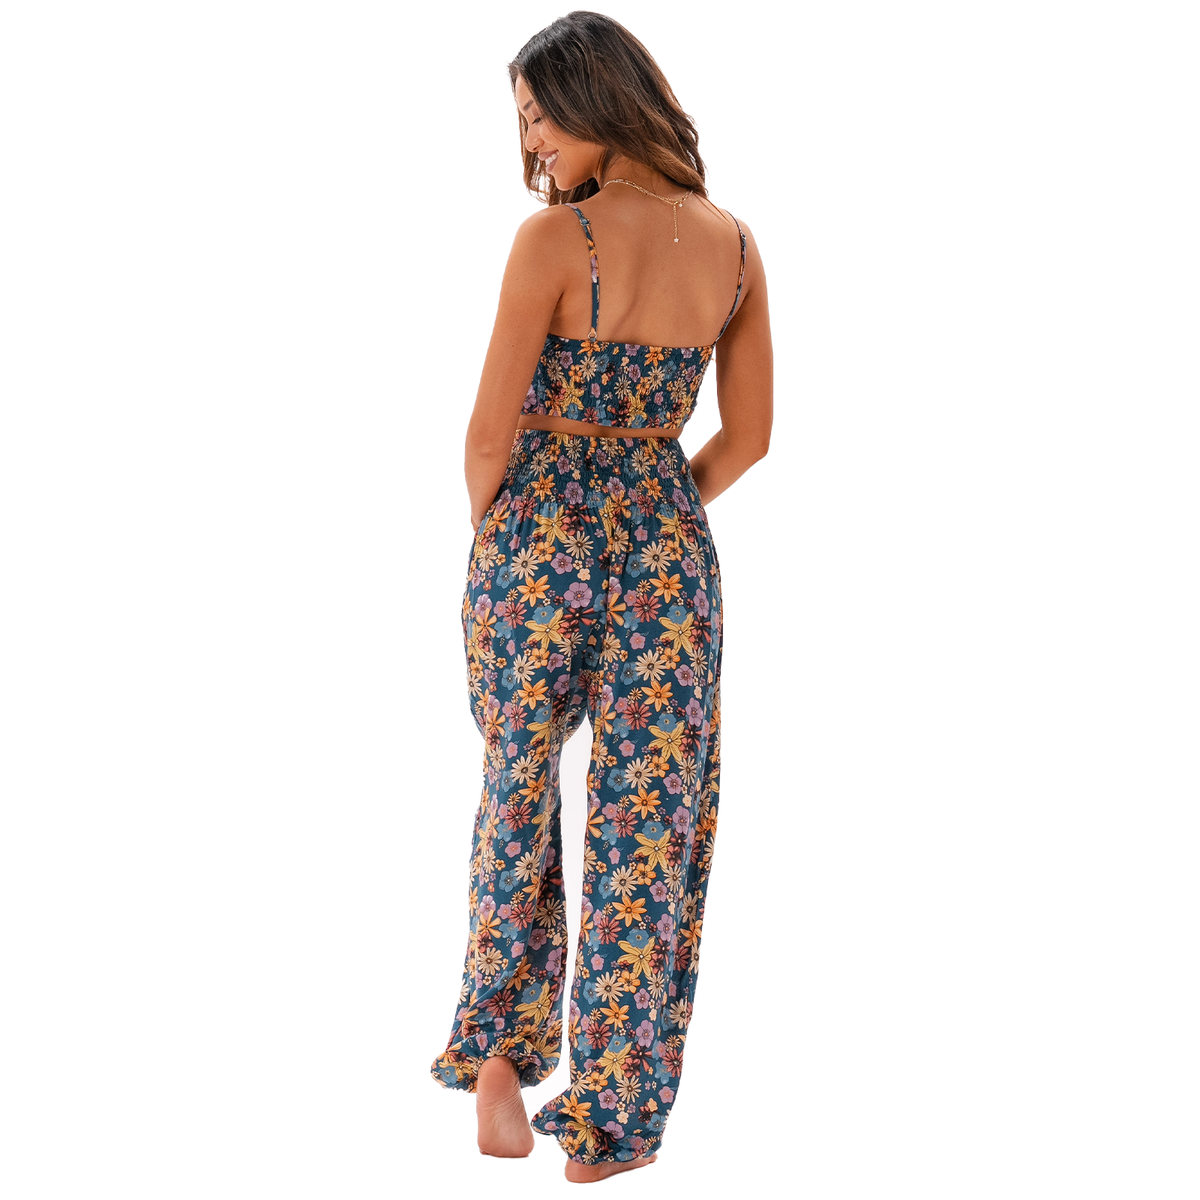 Model wearing blue, pink, orange and yellow floral print harem pants and a matching tank top